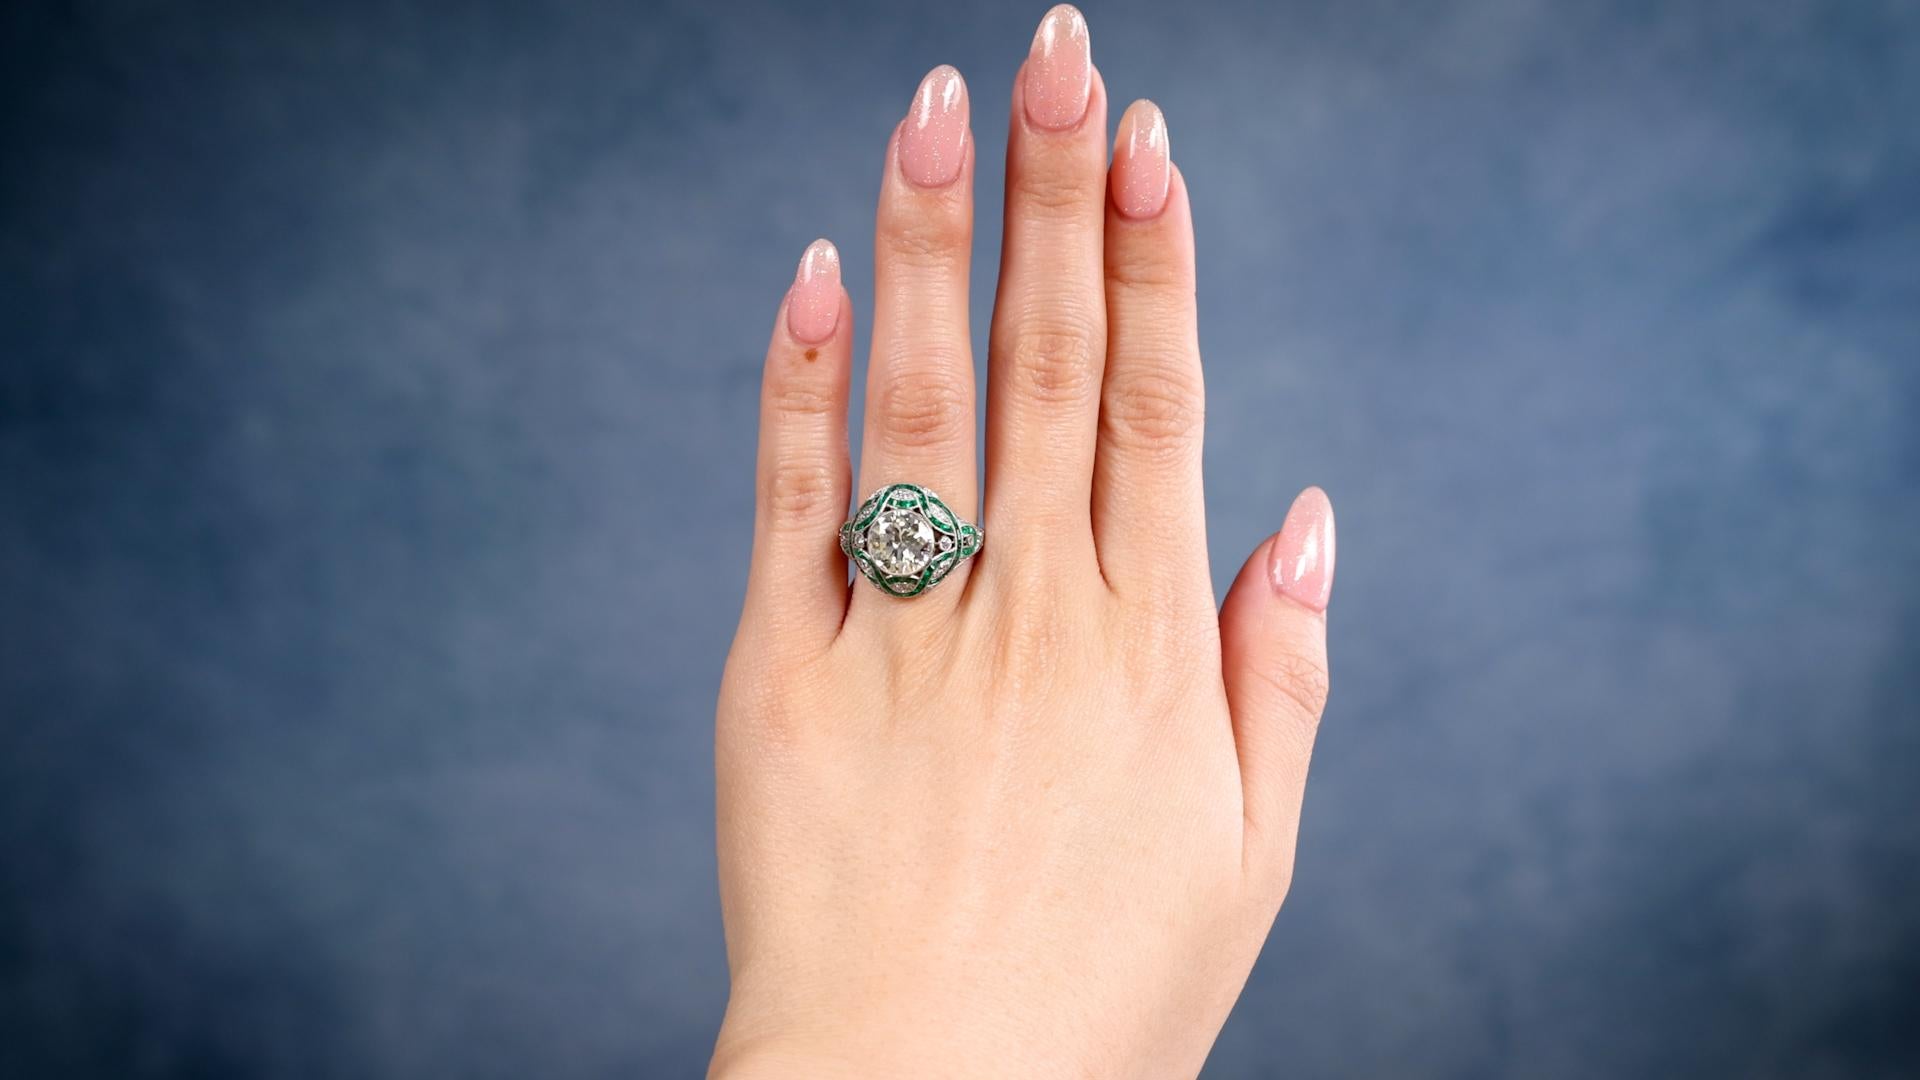 One Art Deco Inspired 2.29 Carat Transitional Cut Diamond Emerald Platinum Ring. Featuring one transitional cut diamond of 2.29 carats, graded S-T color, VS1 clarity. Accented by 56 calibré cut emeralds with a total weight of approximately 1.00